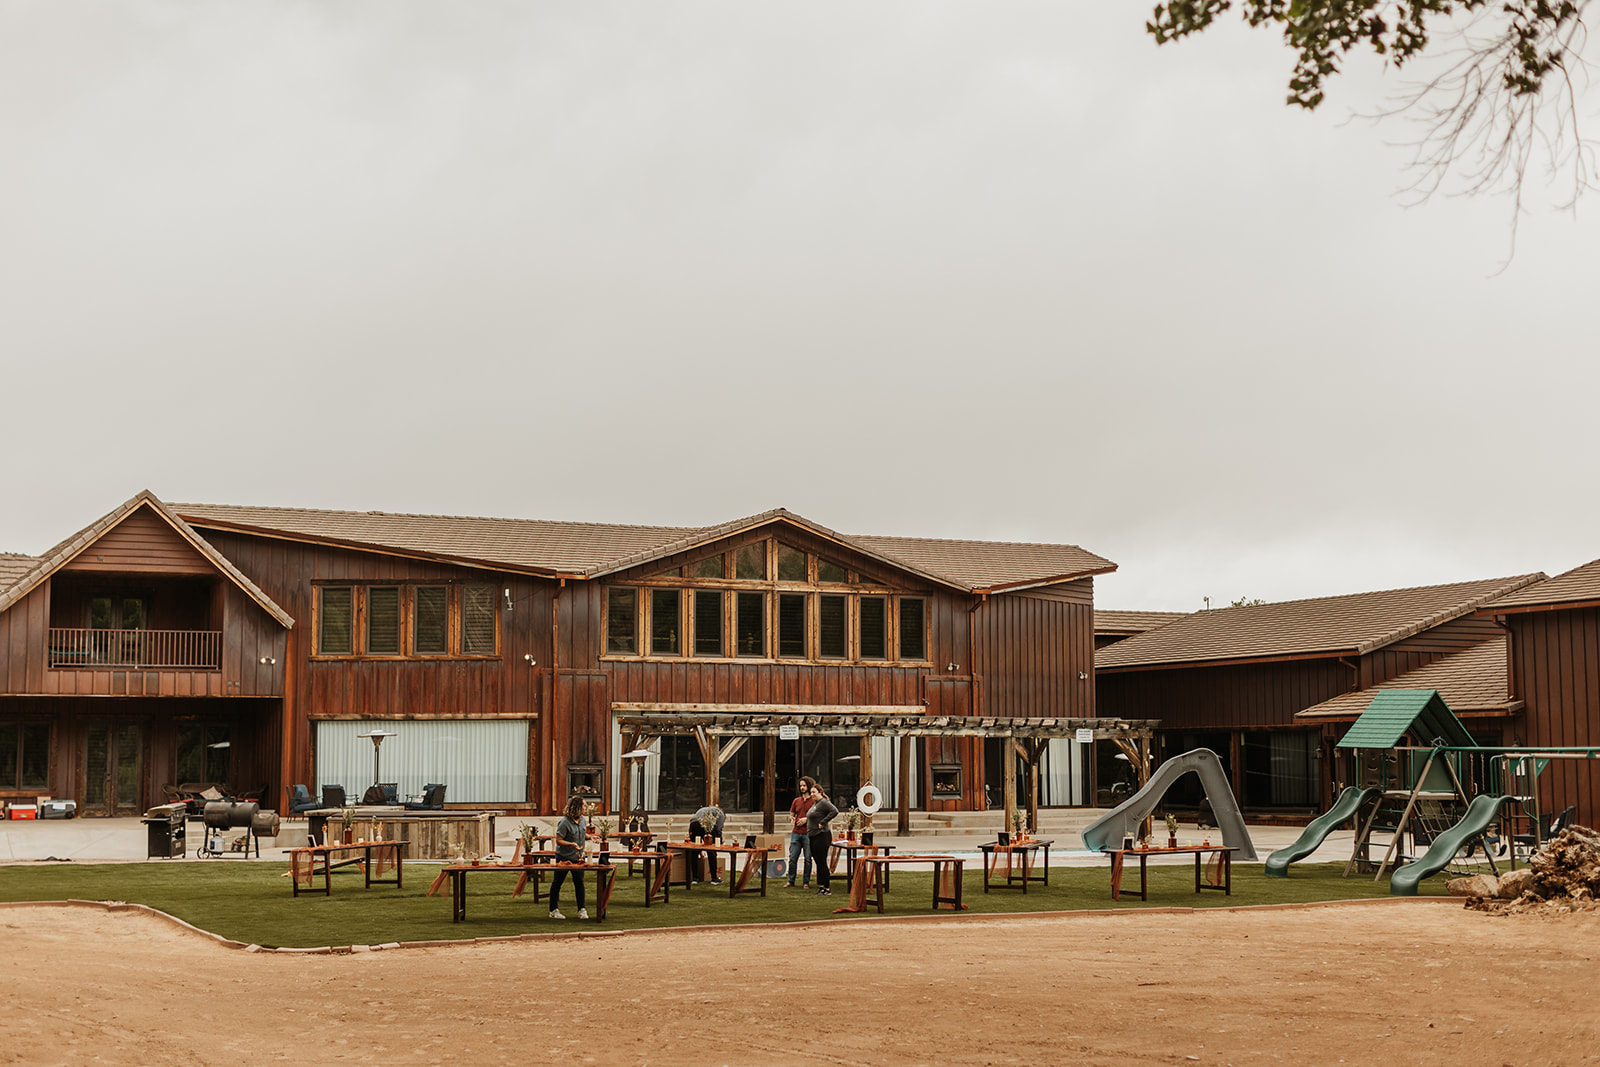 A wide view of the exterior of Zion Red Rock Oasis with an overcast sky and tables being set up 